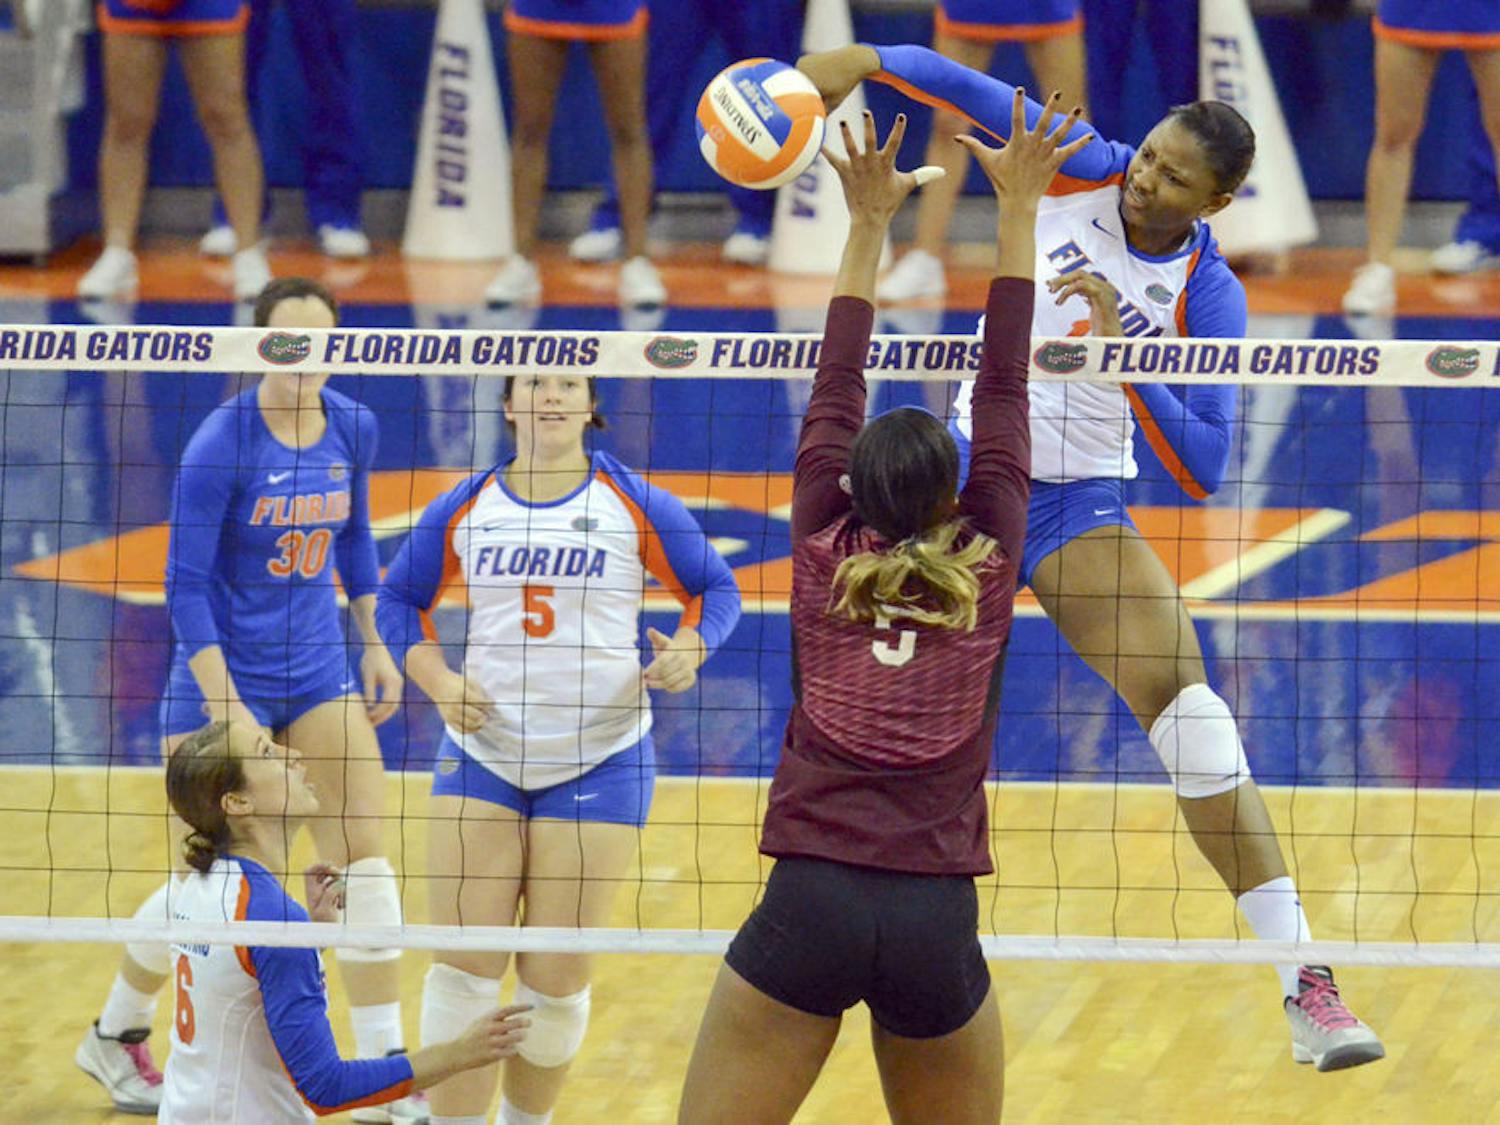 Middle blocker Rhamat Alhassan swings for a kill during Florida's 3-0 win against Mississippi State on Oct. 26, 2014,&nbsp;in the O'Connell Center.